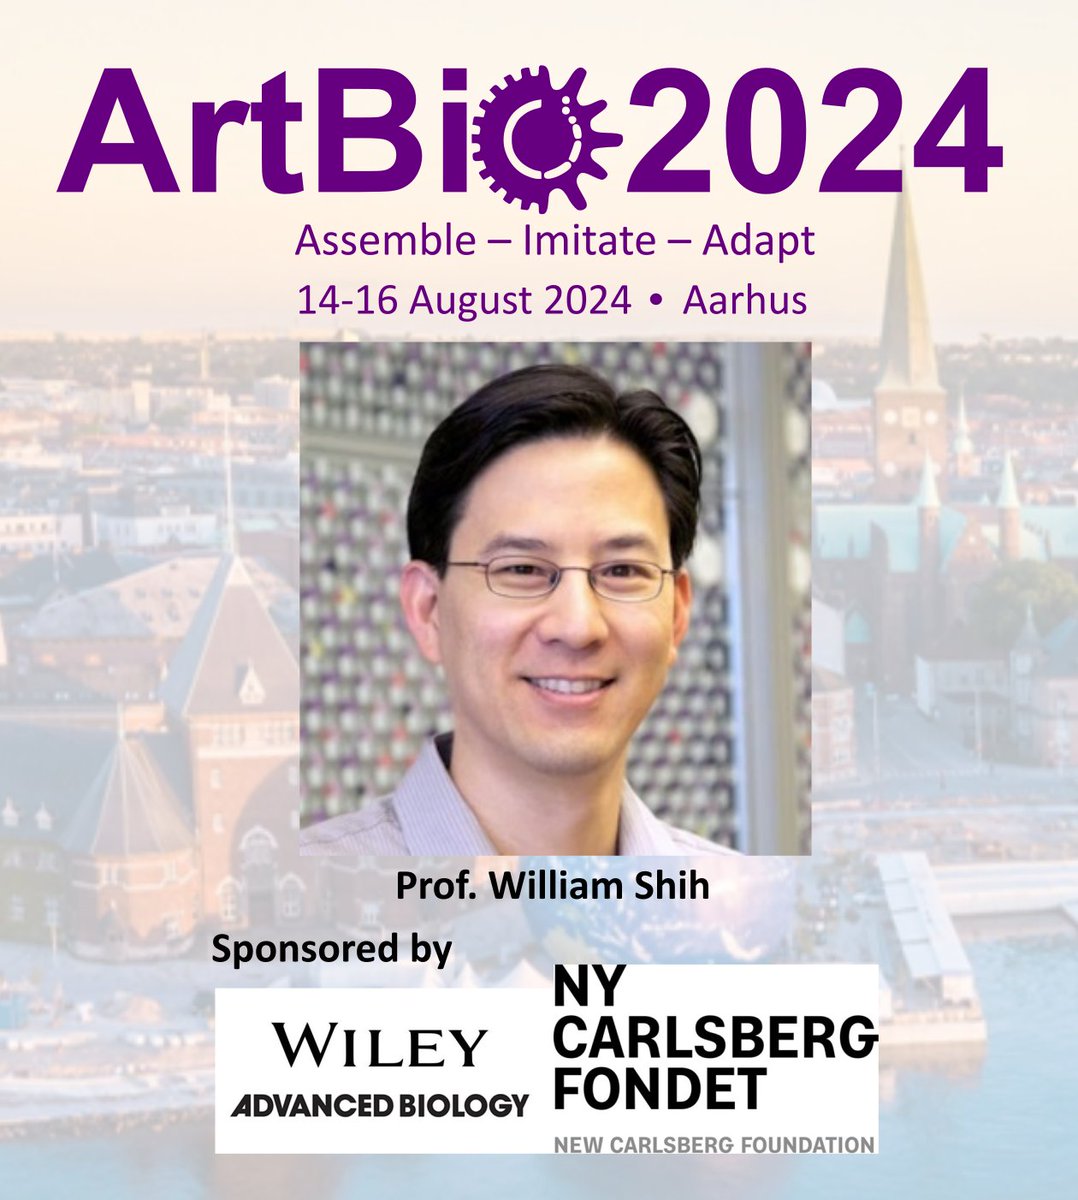 📣 Meet our new invited speaker! 📣 William M. Shih from Harvard University (DNA nanotechnology) ⏰ REMEMBER! The deadline for abstract submissions has been extended until 10th May at 8 am CEST 👀 Hurry up and submit your abstract here 👇 : events.au.dk/artbio2024/abs… #ArtBio2024